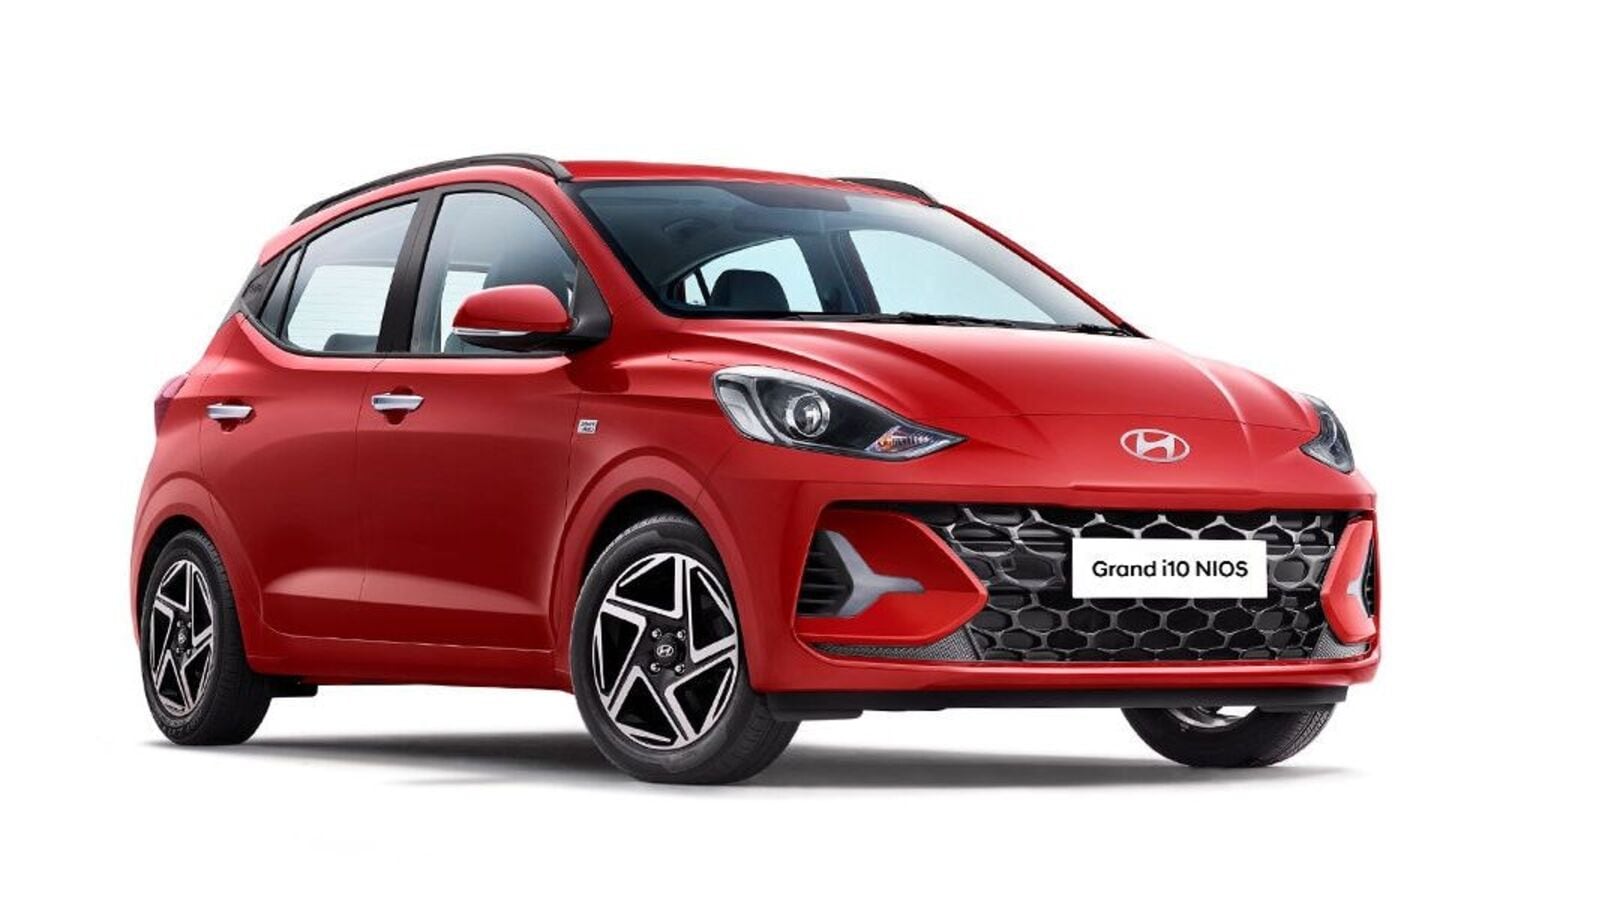 2023 Hyundai Grand i10 Nios launched: Variant-wise features